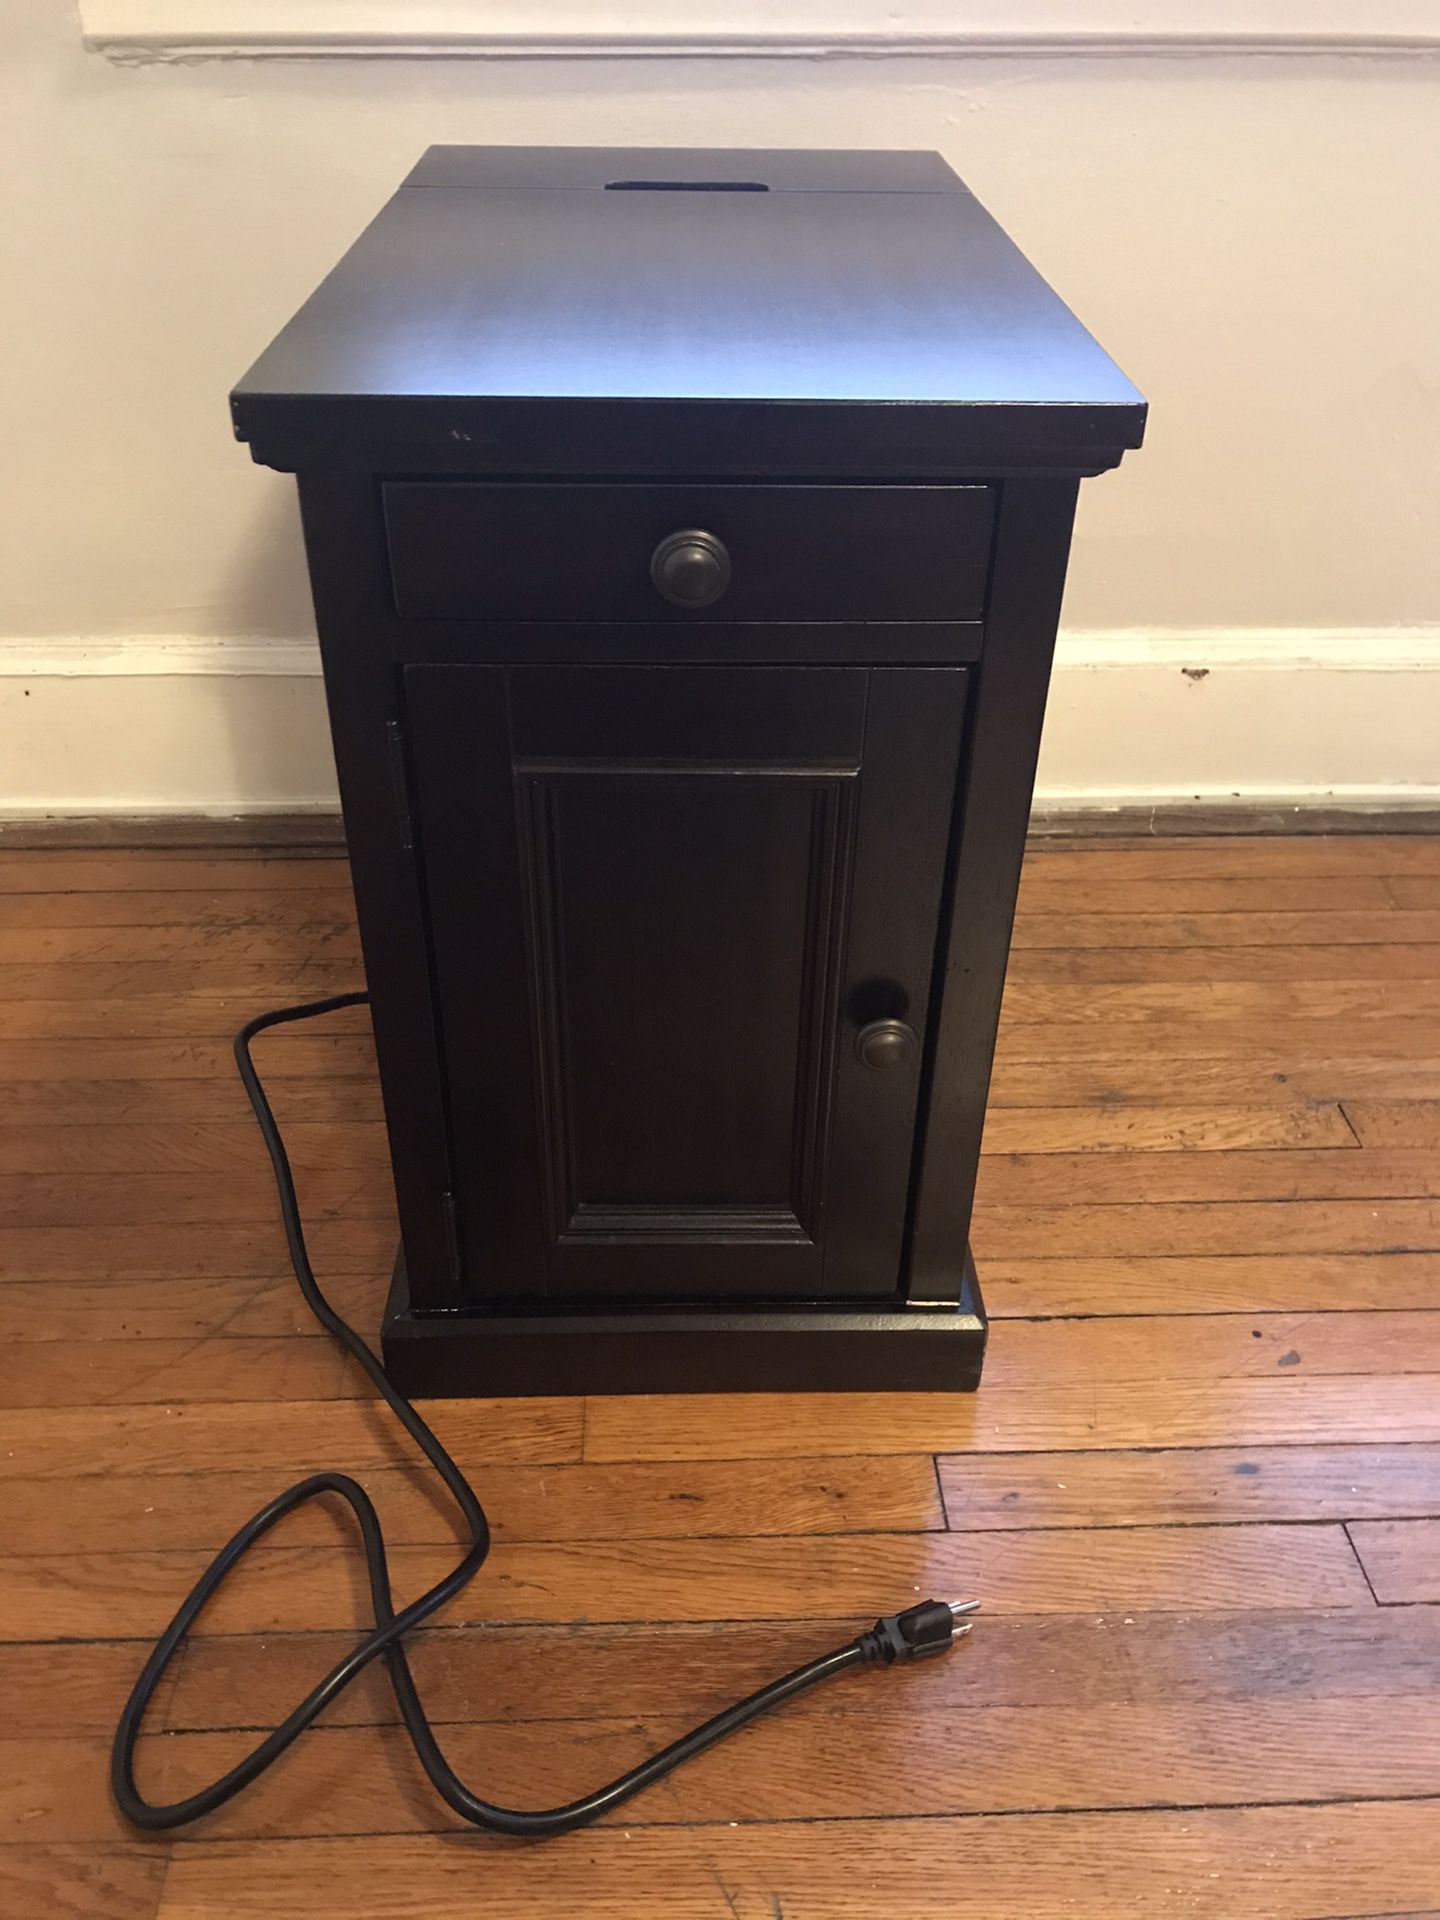 End Table or Night Stand with built-in power strip